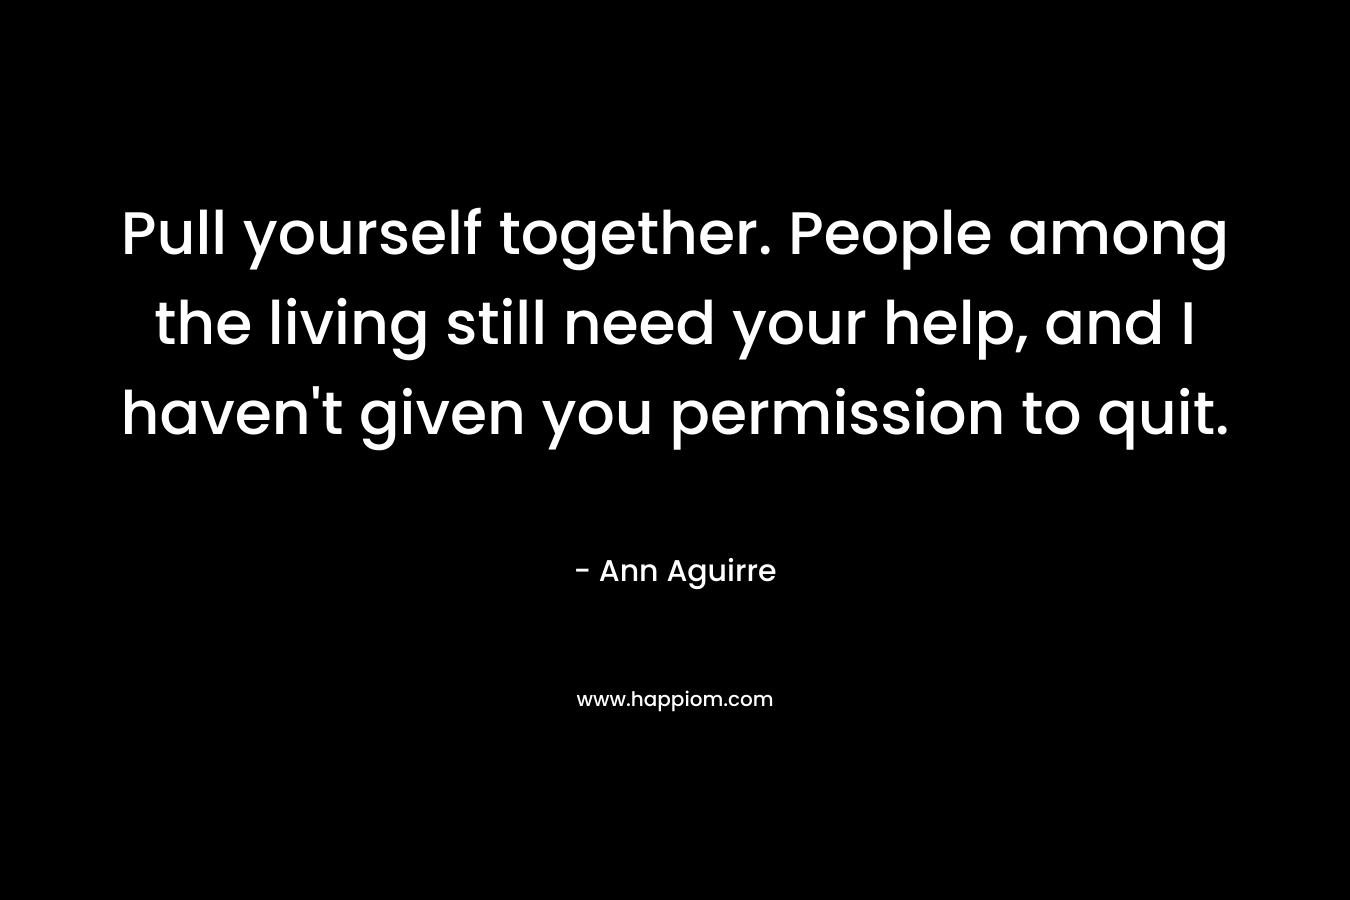 Pull yourself together. People among the living still need your help, and I haven't given you permission to quit.